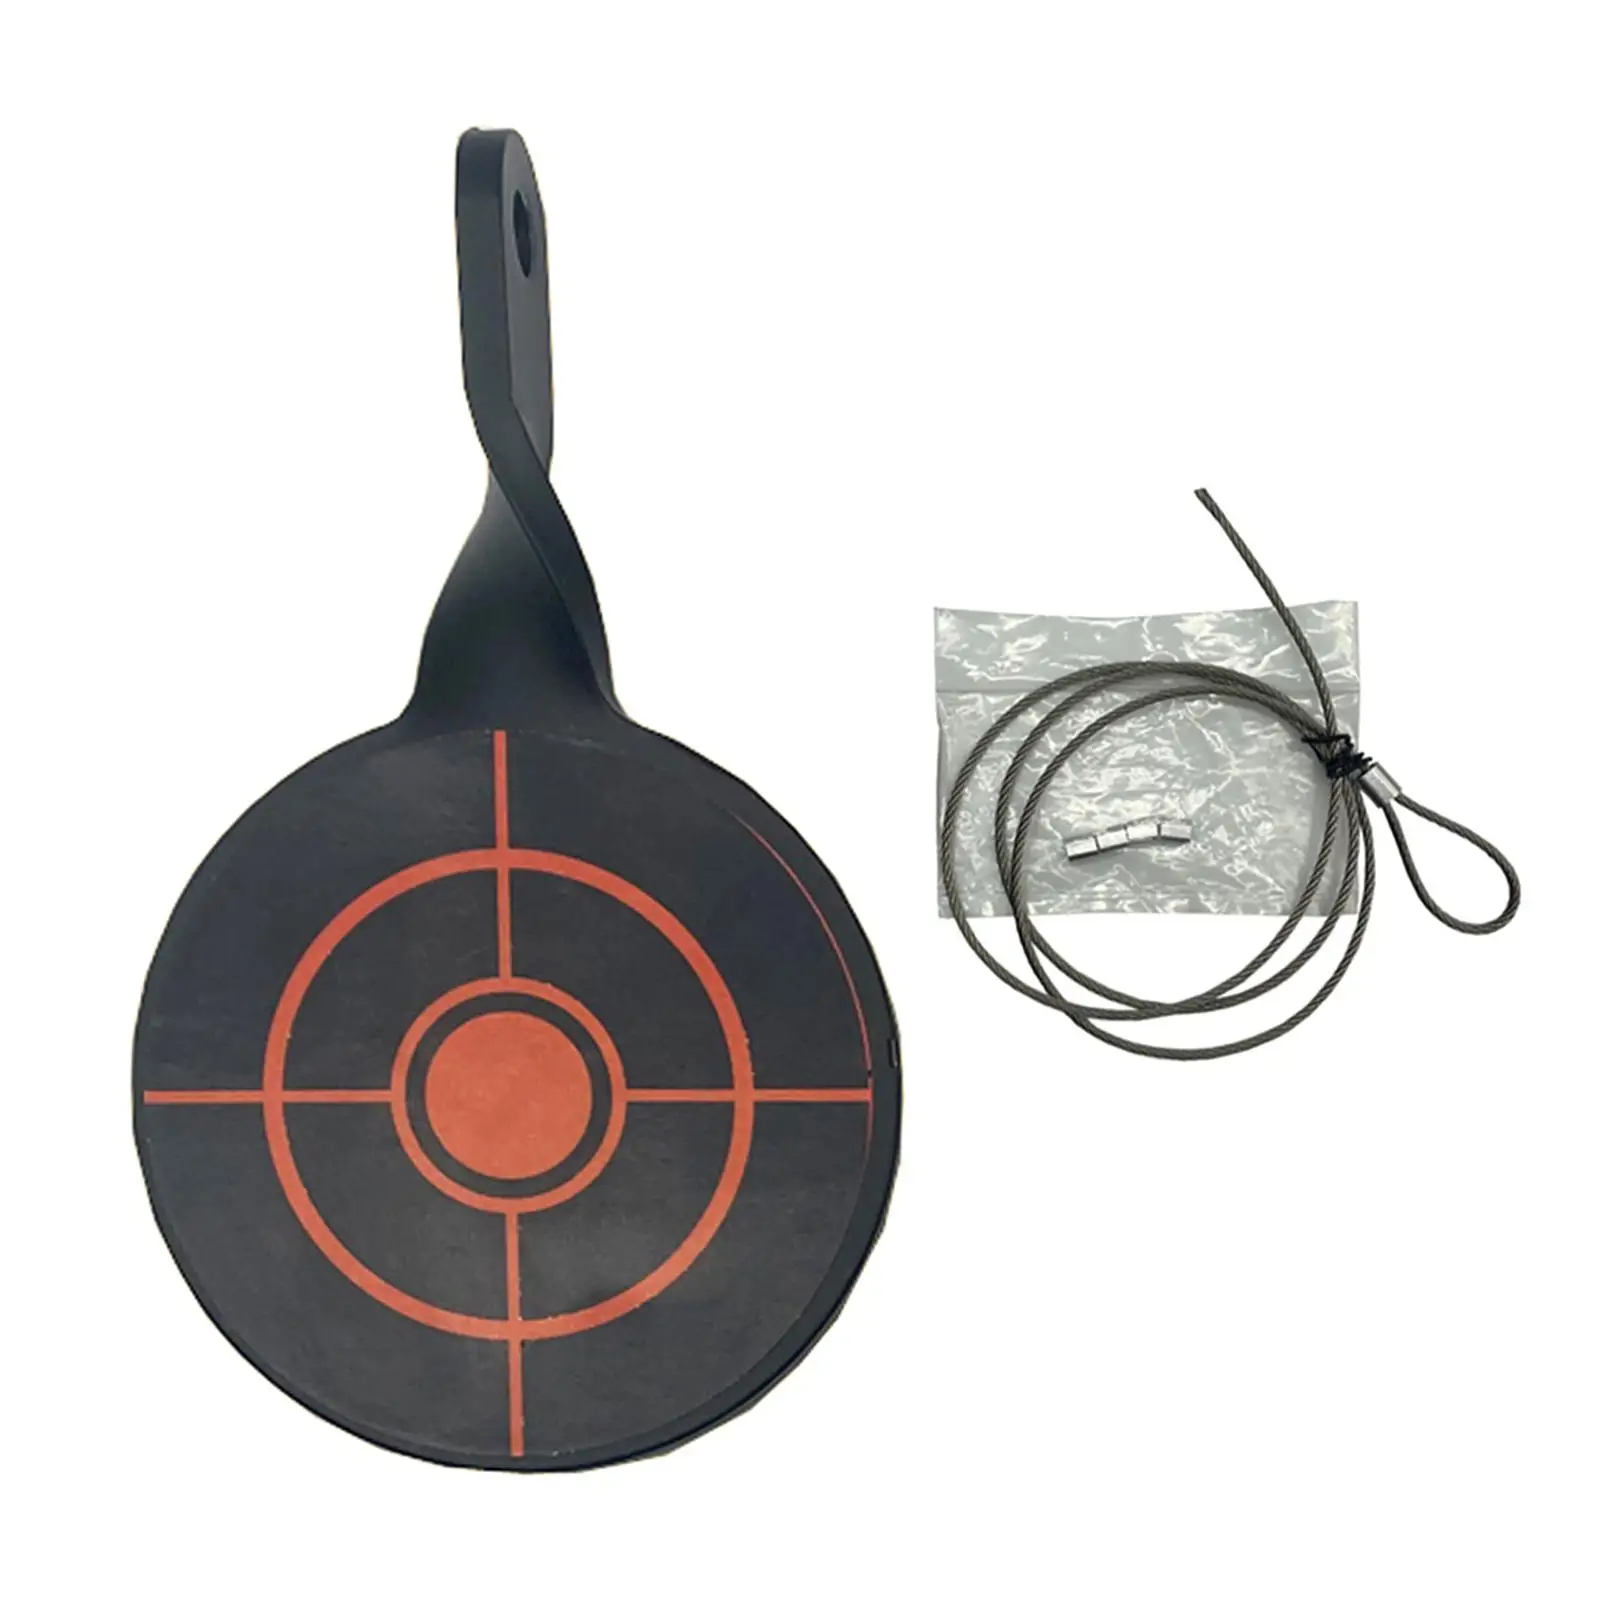  Target Plate Round 3inch Resetting Plinking Target Hunting